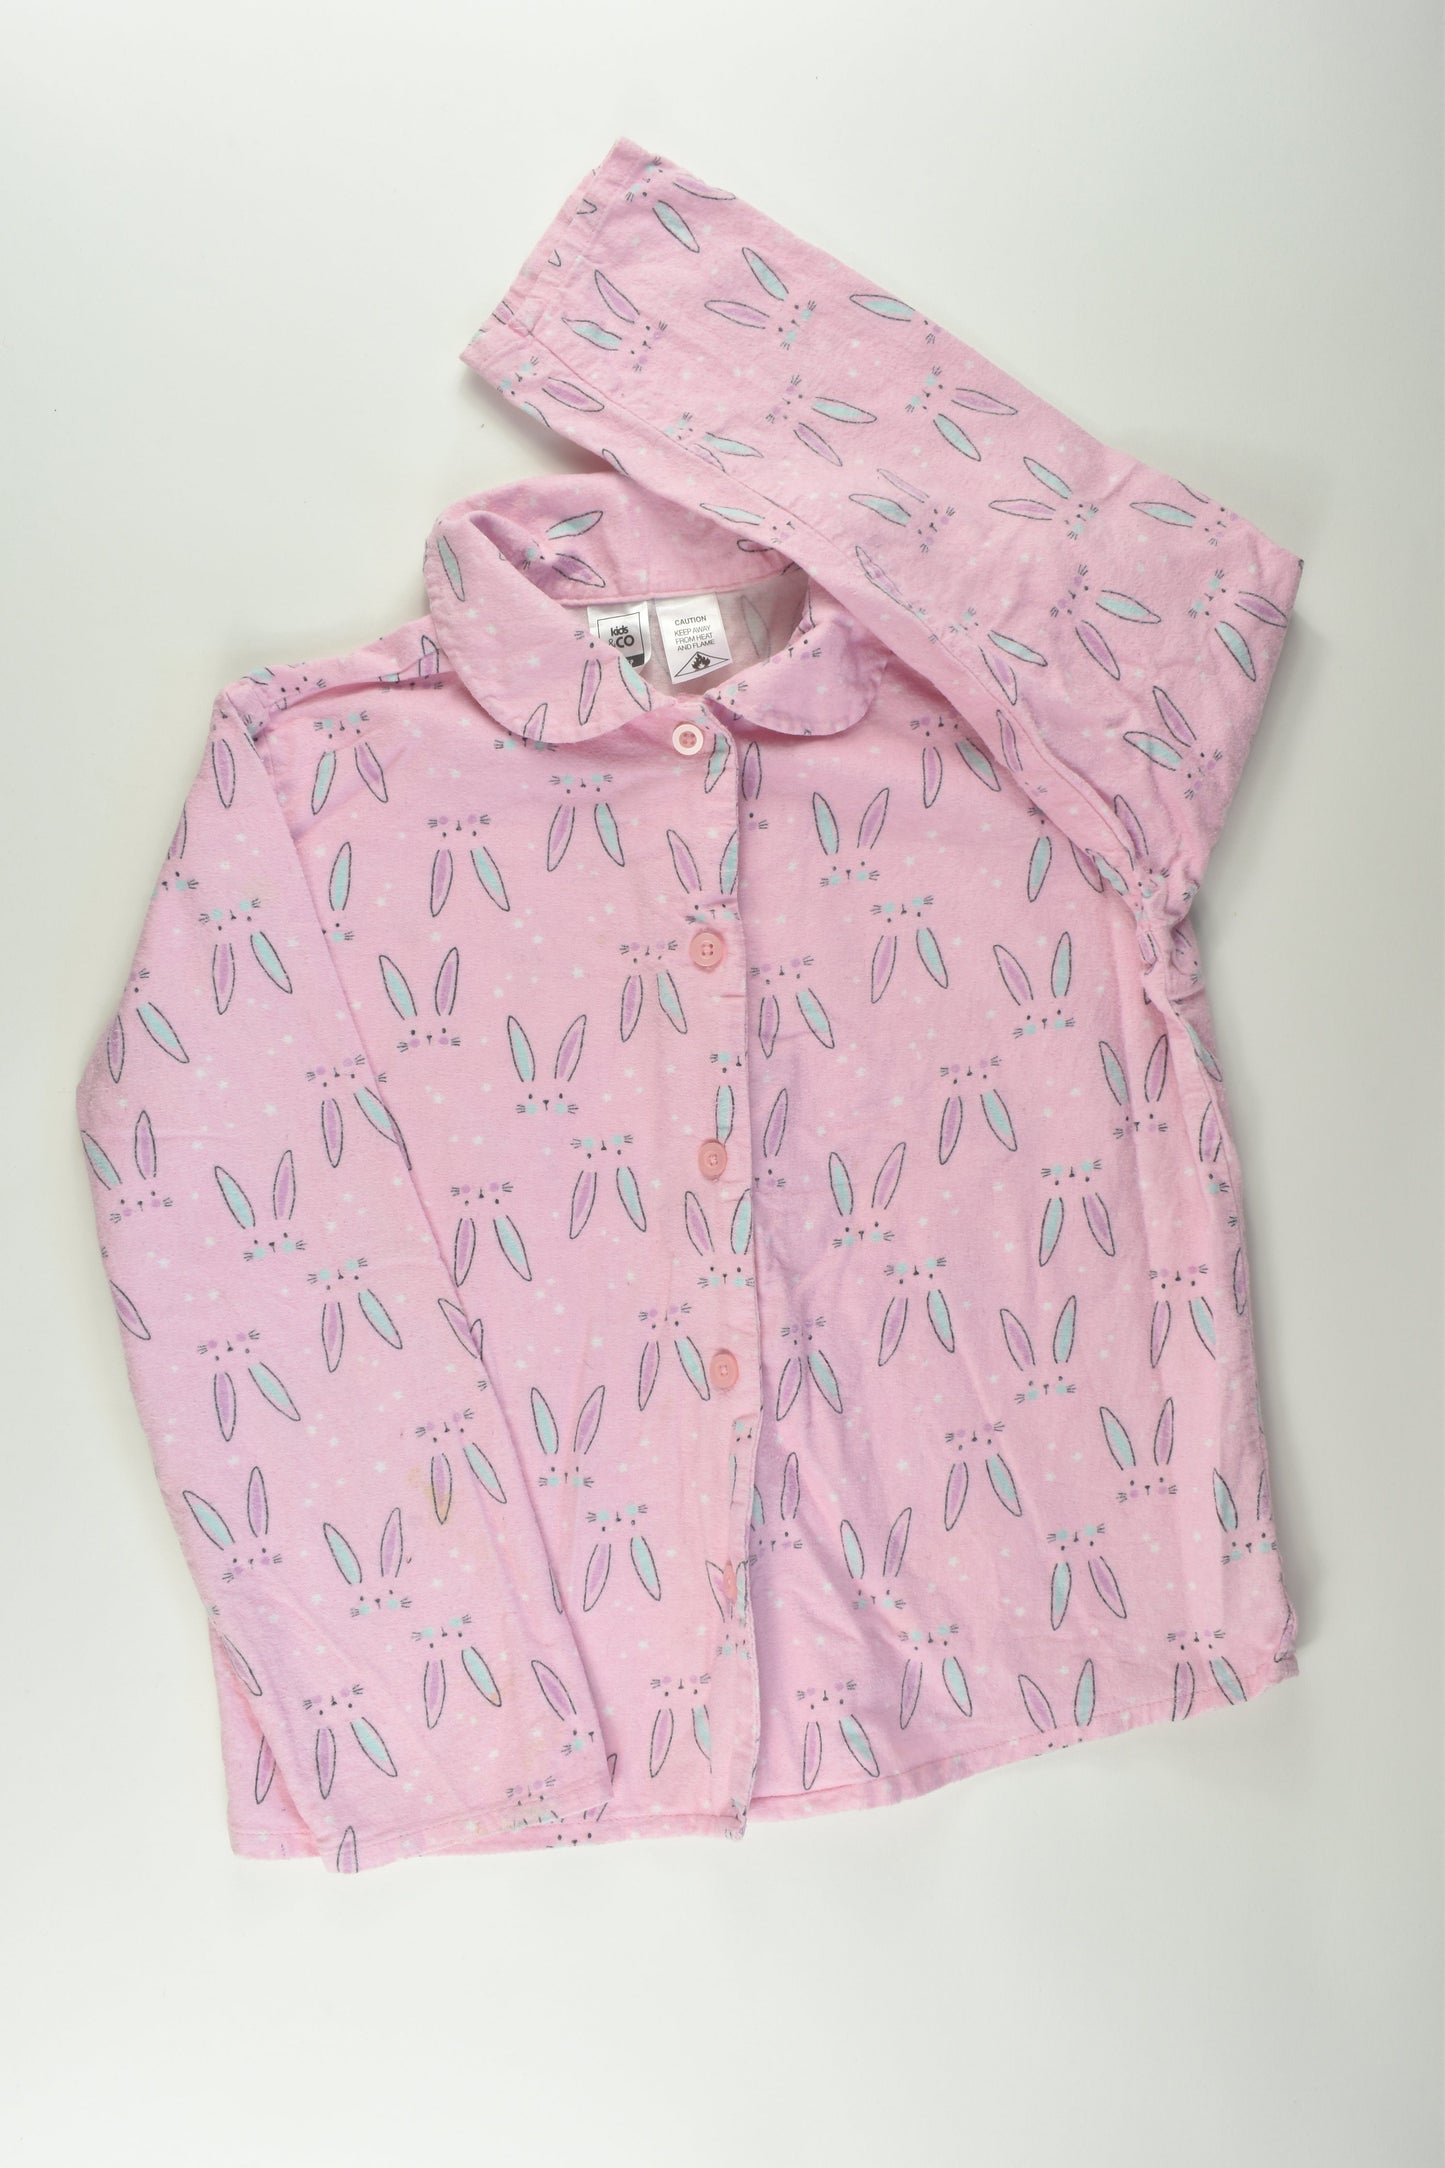 Kids & Co Size 10 Bunny Flannel Shirt